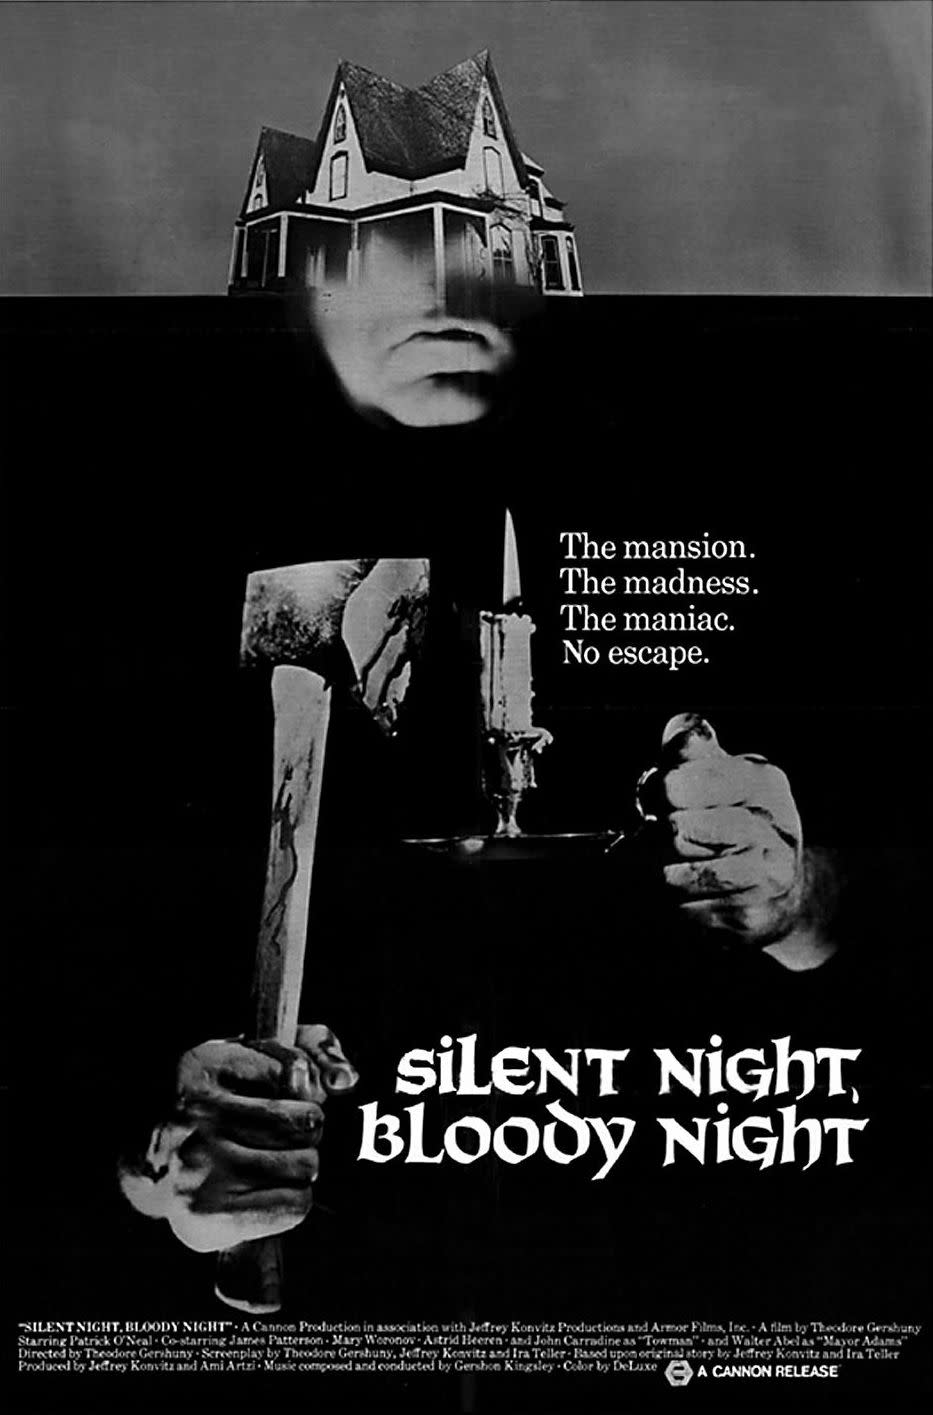 <p>When a man inherits a mansion that was once an asylum, he sets out to sell the property. But when he visits the home, a sadistic axe-murderer thwarts his plans.</p><p><a class="link " href="https://www.amazon.com/Silent-Night-Bloody-Patrick/dp/B002W9CAG4?tag=syn-yahoo-20&ascsubtag=%5Bartid%7C10065.g.40884264%5Bsrc%7Cyahoo-us" rel="nofollow noopener" target="_blank" data-ylk="slk:Watch Now on Amazon Prime">Watch Now on Amazon Prime</a></p>